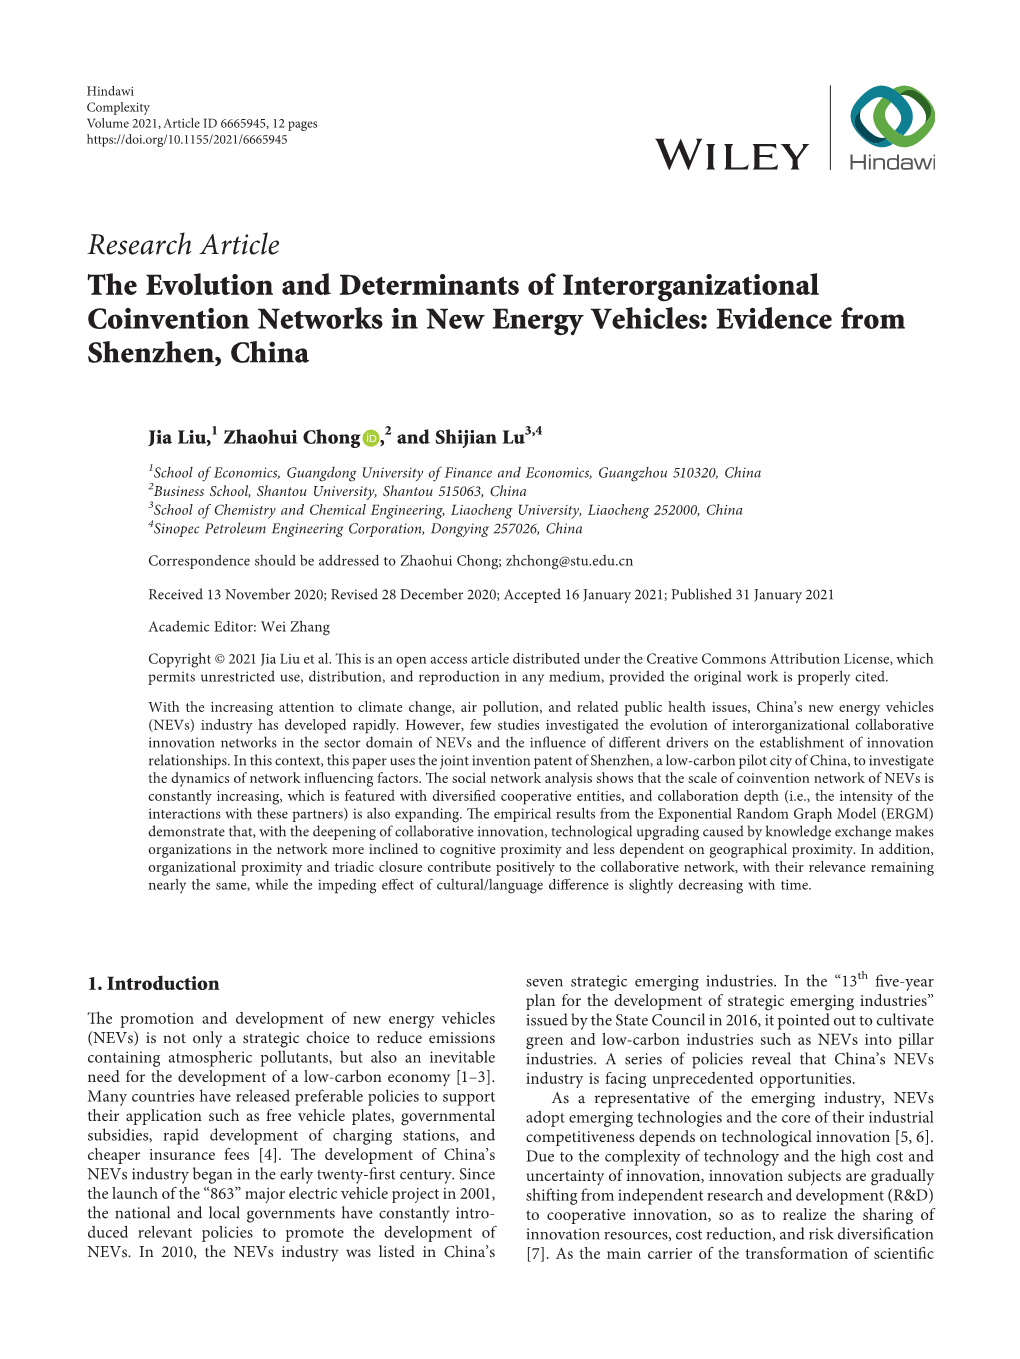 The Evolution and Determinants of Interorganizational Coinvention Networks in New Energy Vehicles: Evidence from Shenzhen, China